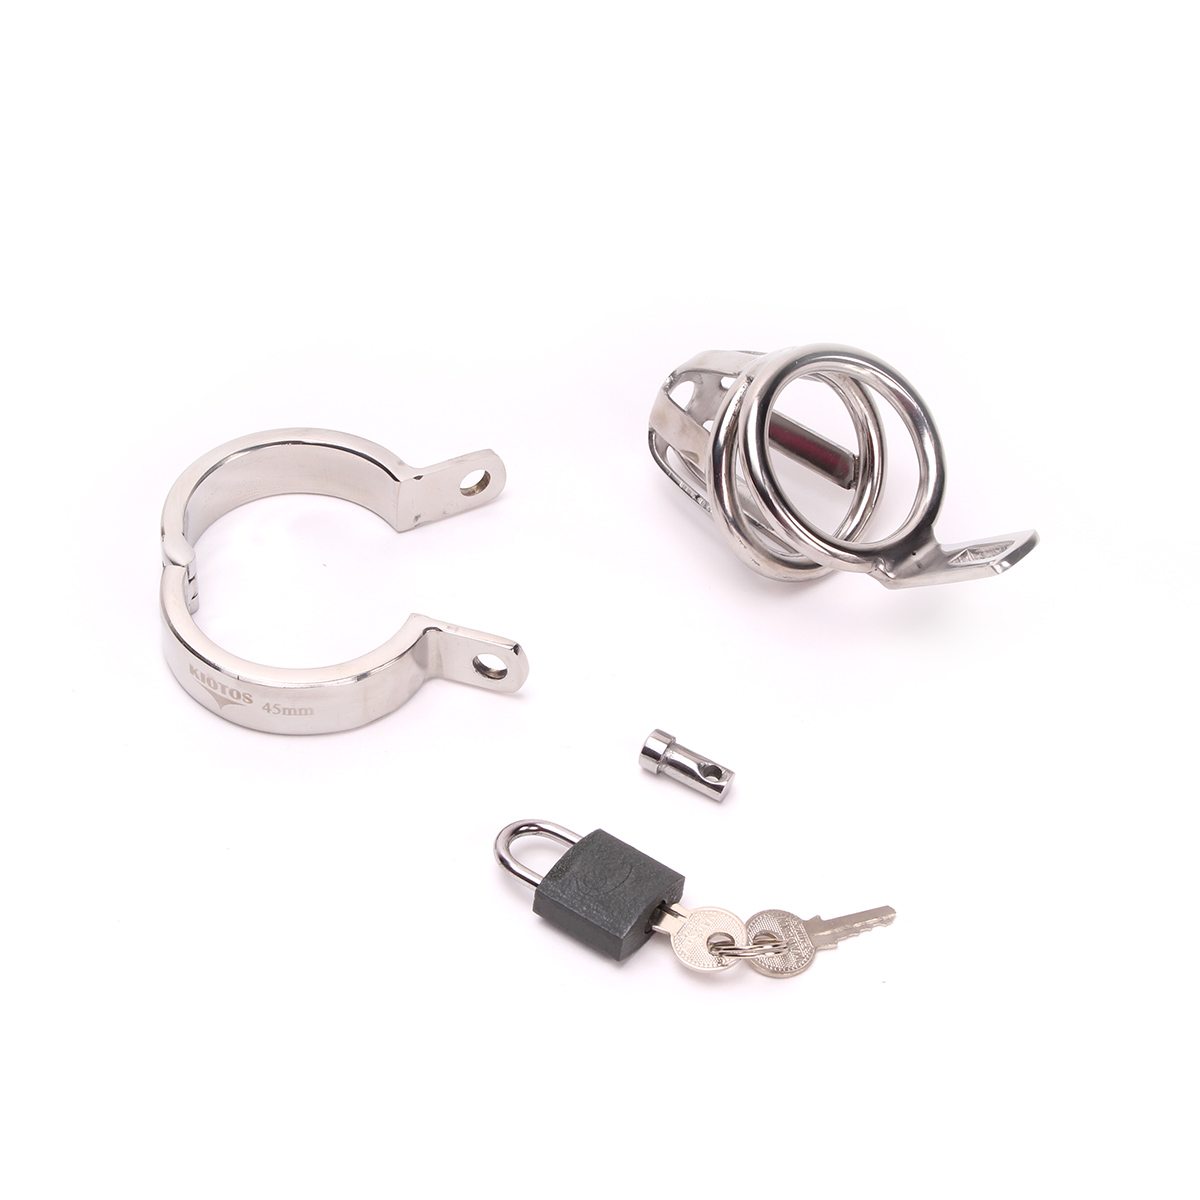 Chastity-Cage-Small-Steel-OPR-277030-5